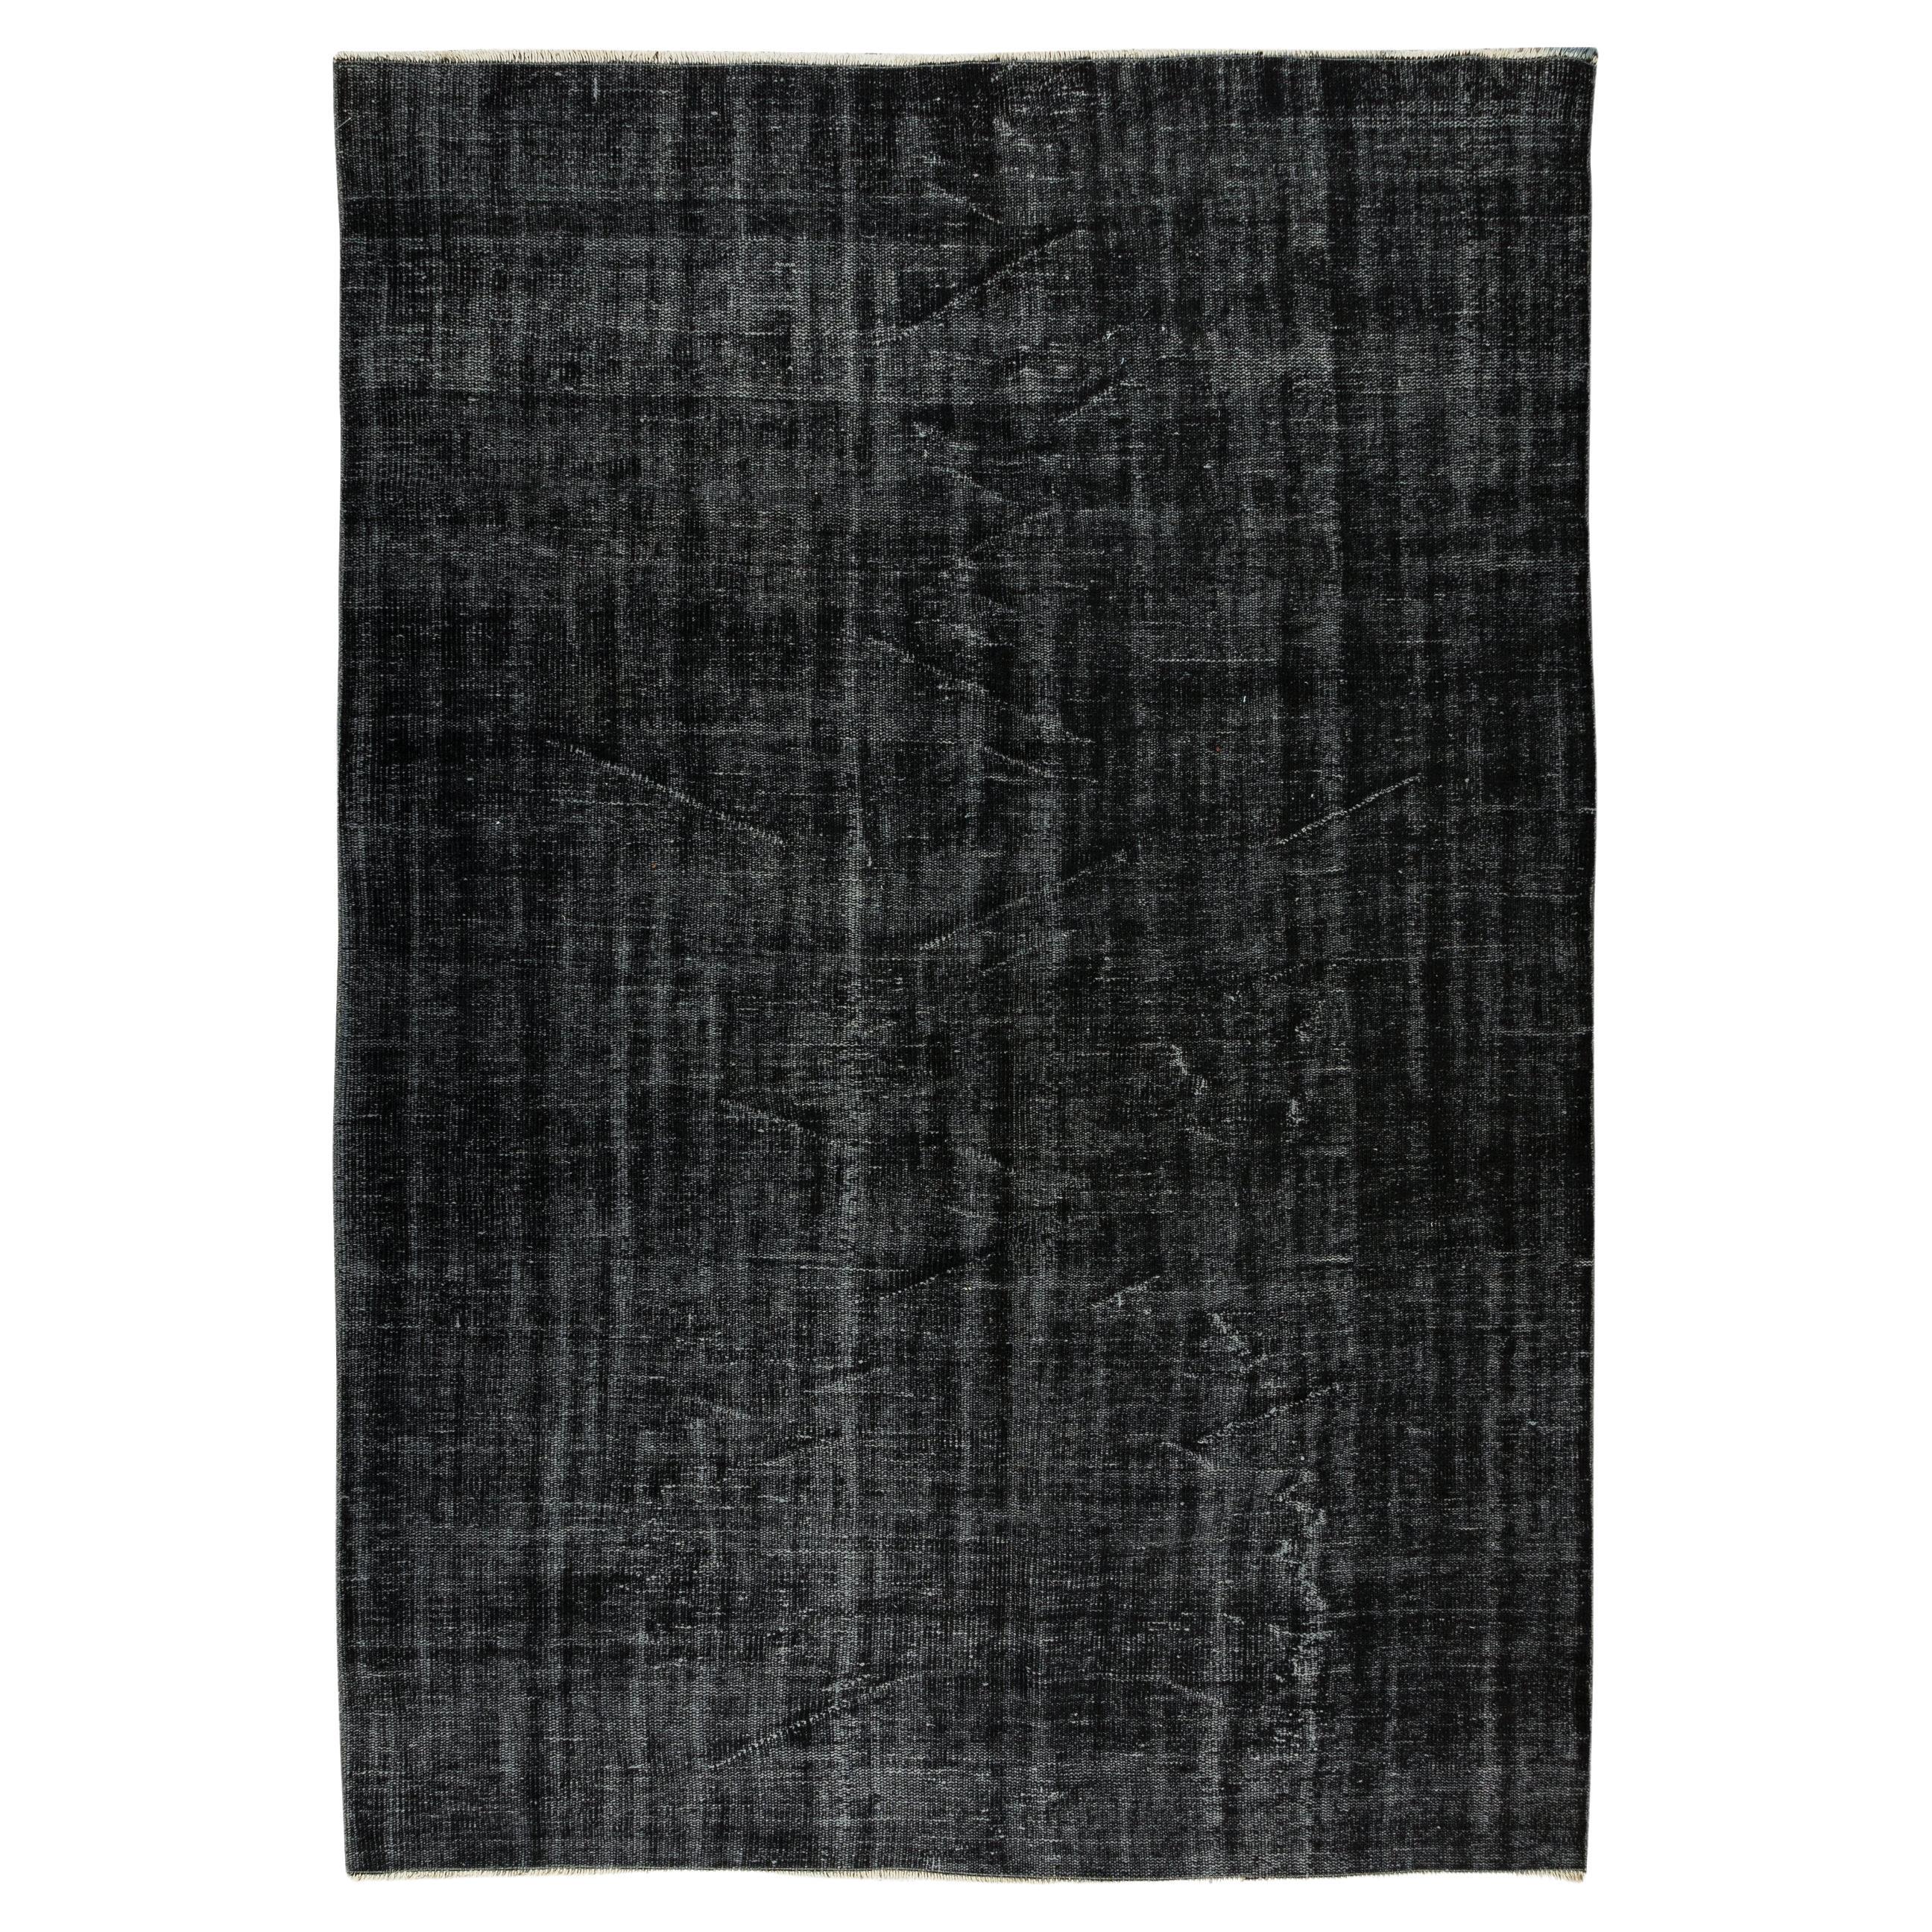 Handmade Vintage Turkish Area Rug Re-Dyed in Black 4 Modern Interiors For Sale